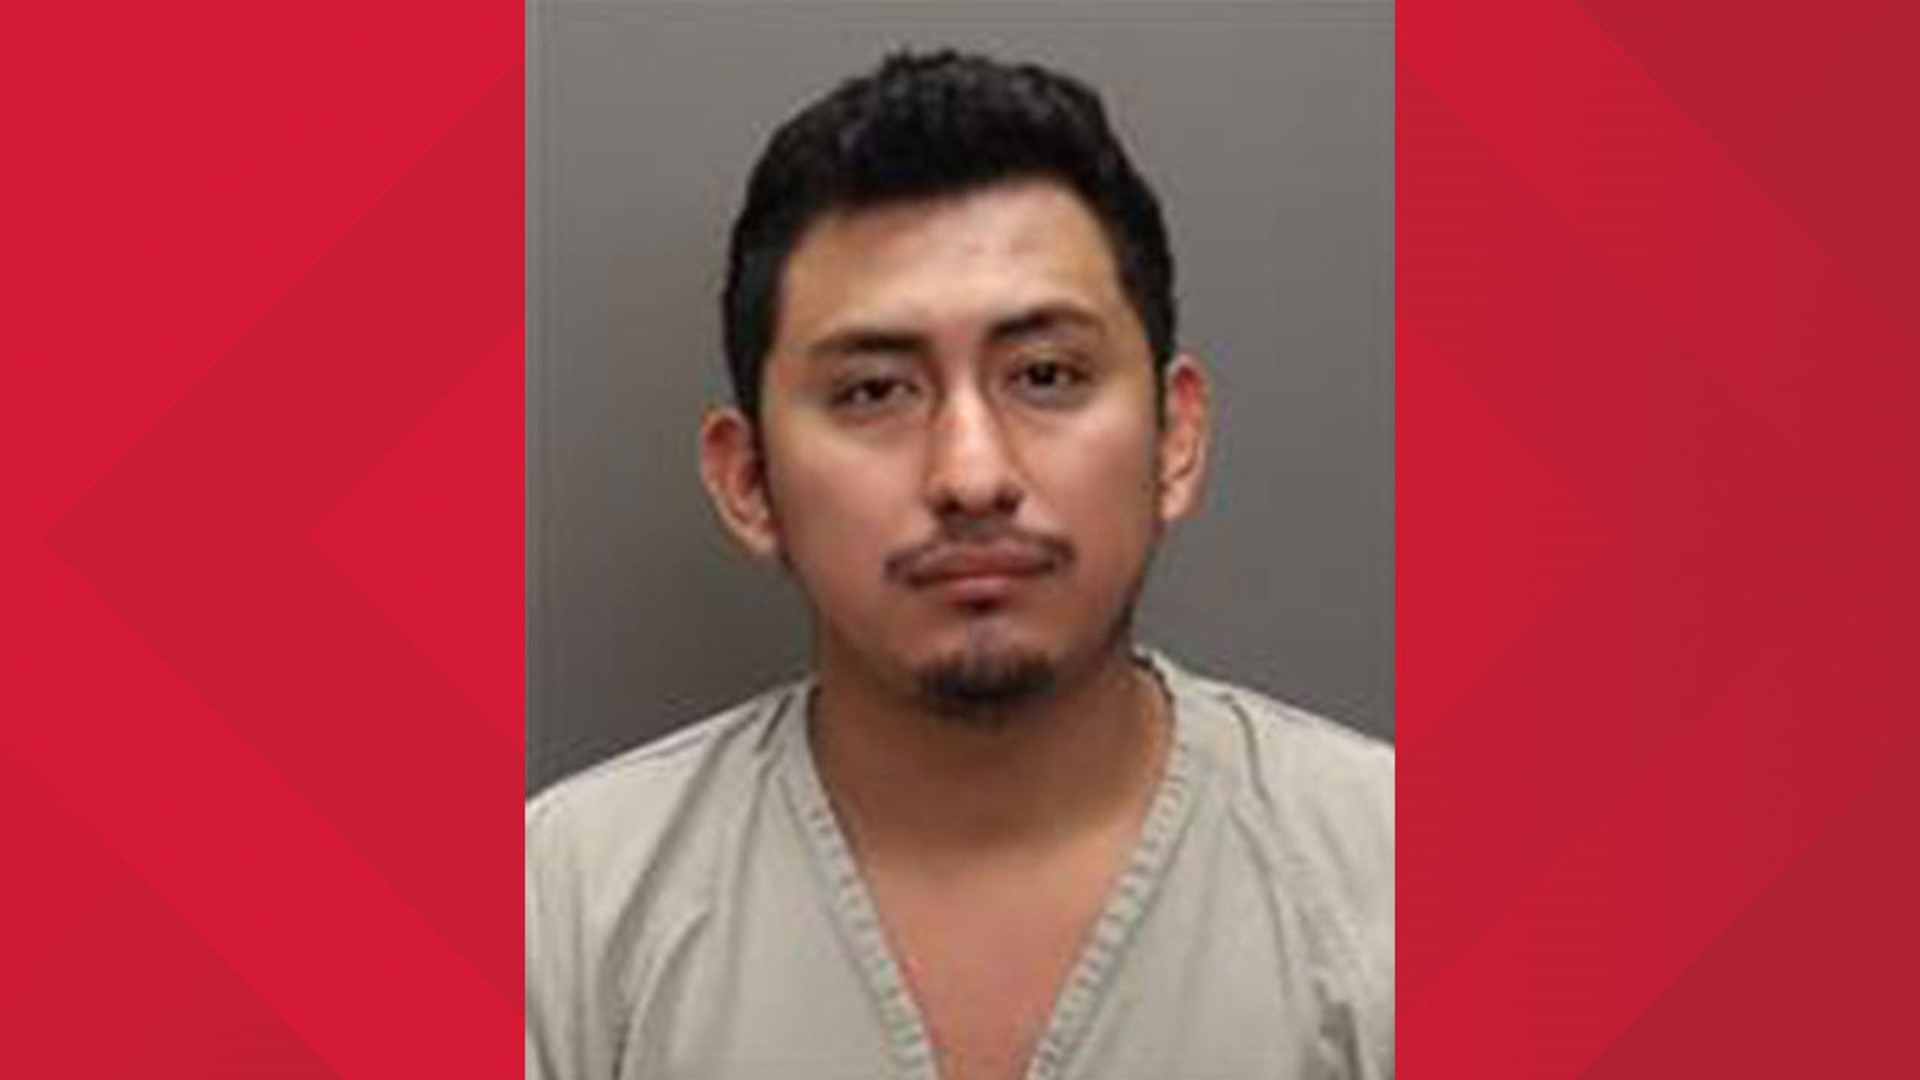 Gerson Fuentes, 27, has been charged with one count of rape. He was given a $2 million bond.